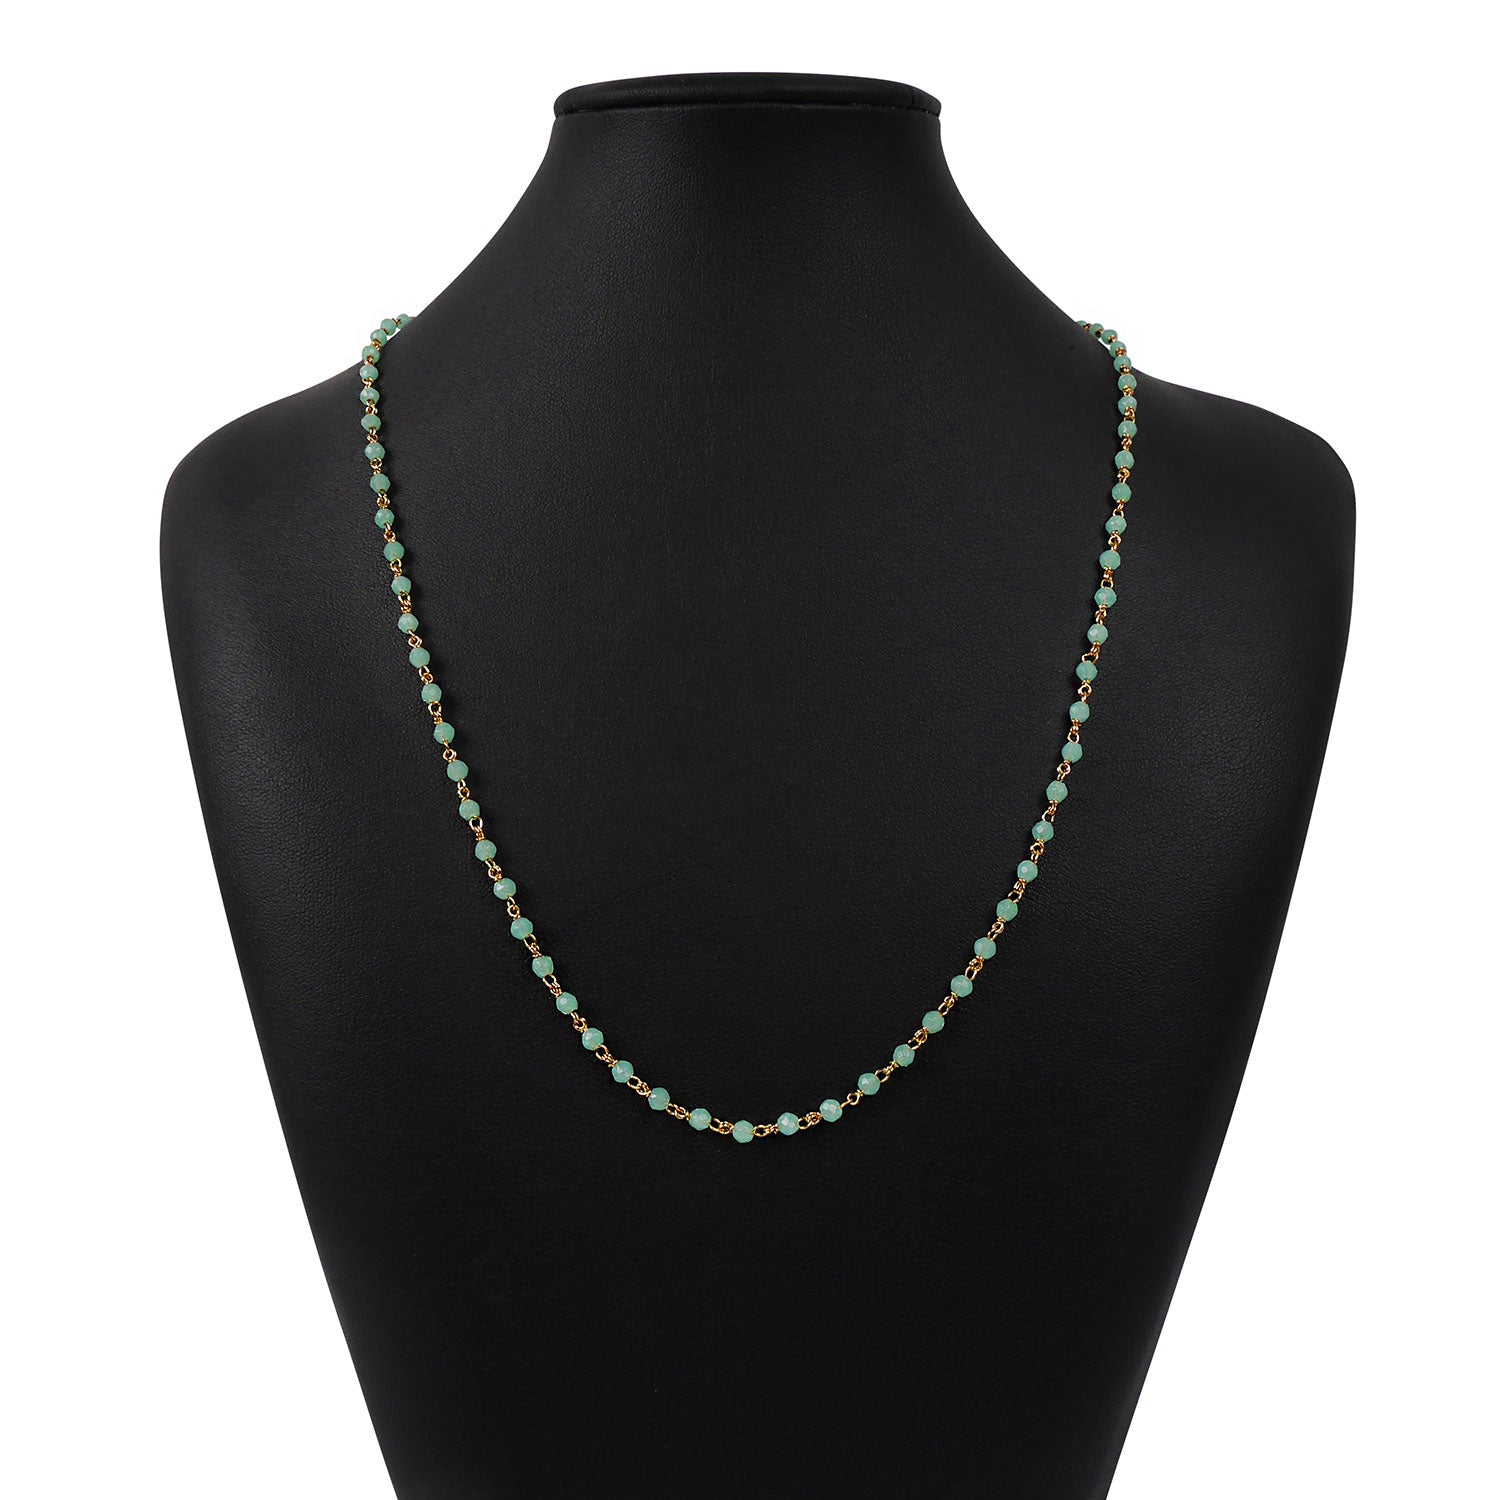 Maria Beaded Necklace in Mint